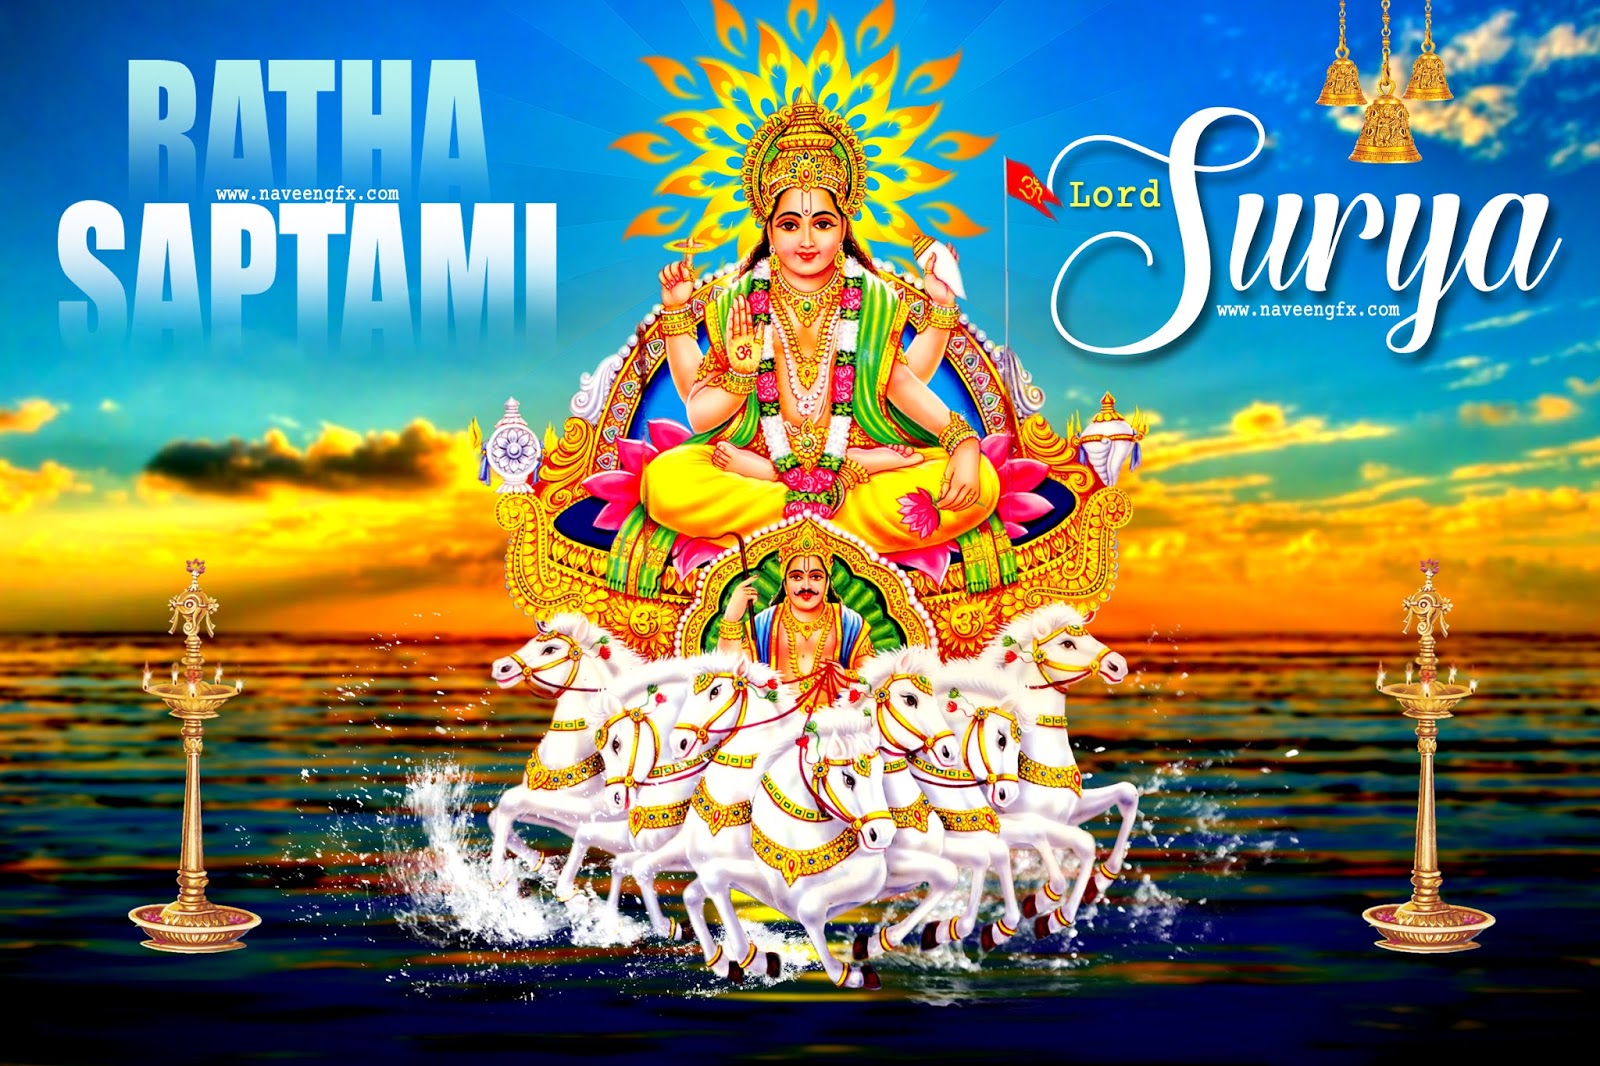 Featured image of post Lord Surya Hd Images Download lord shiva images lord shiva photos pics and hd wallpapers shiva is said to be the destroyer of evil and the transformer within the trimurti consisting of lord shiva images